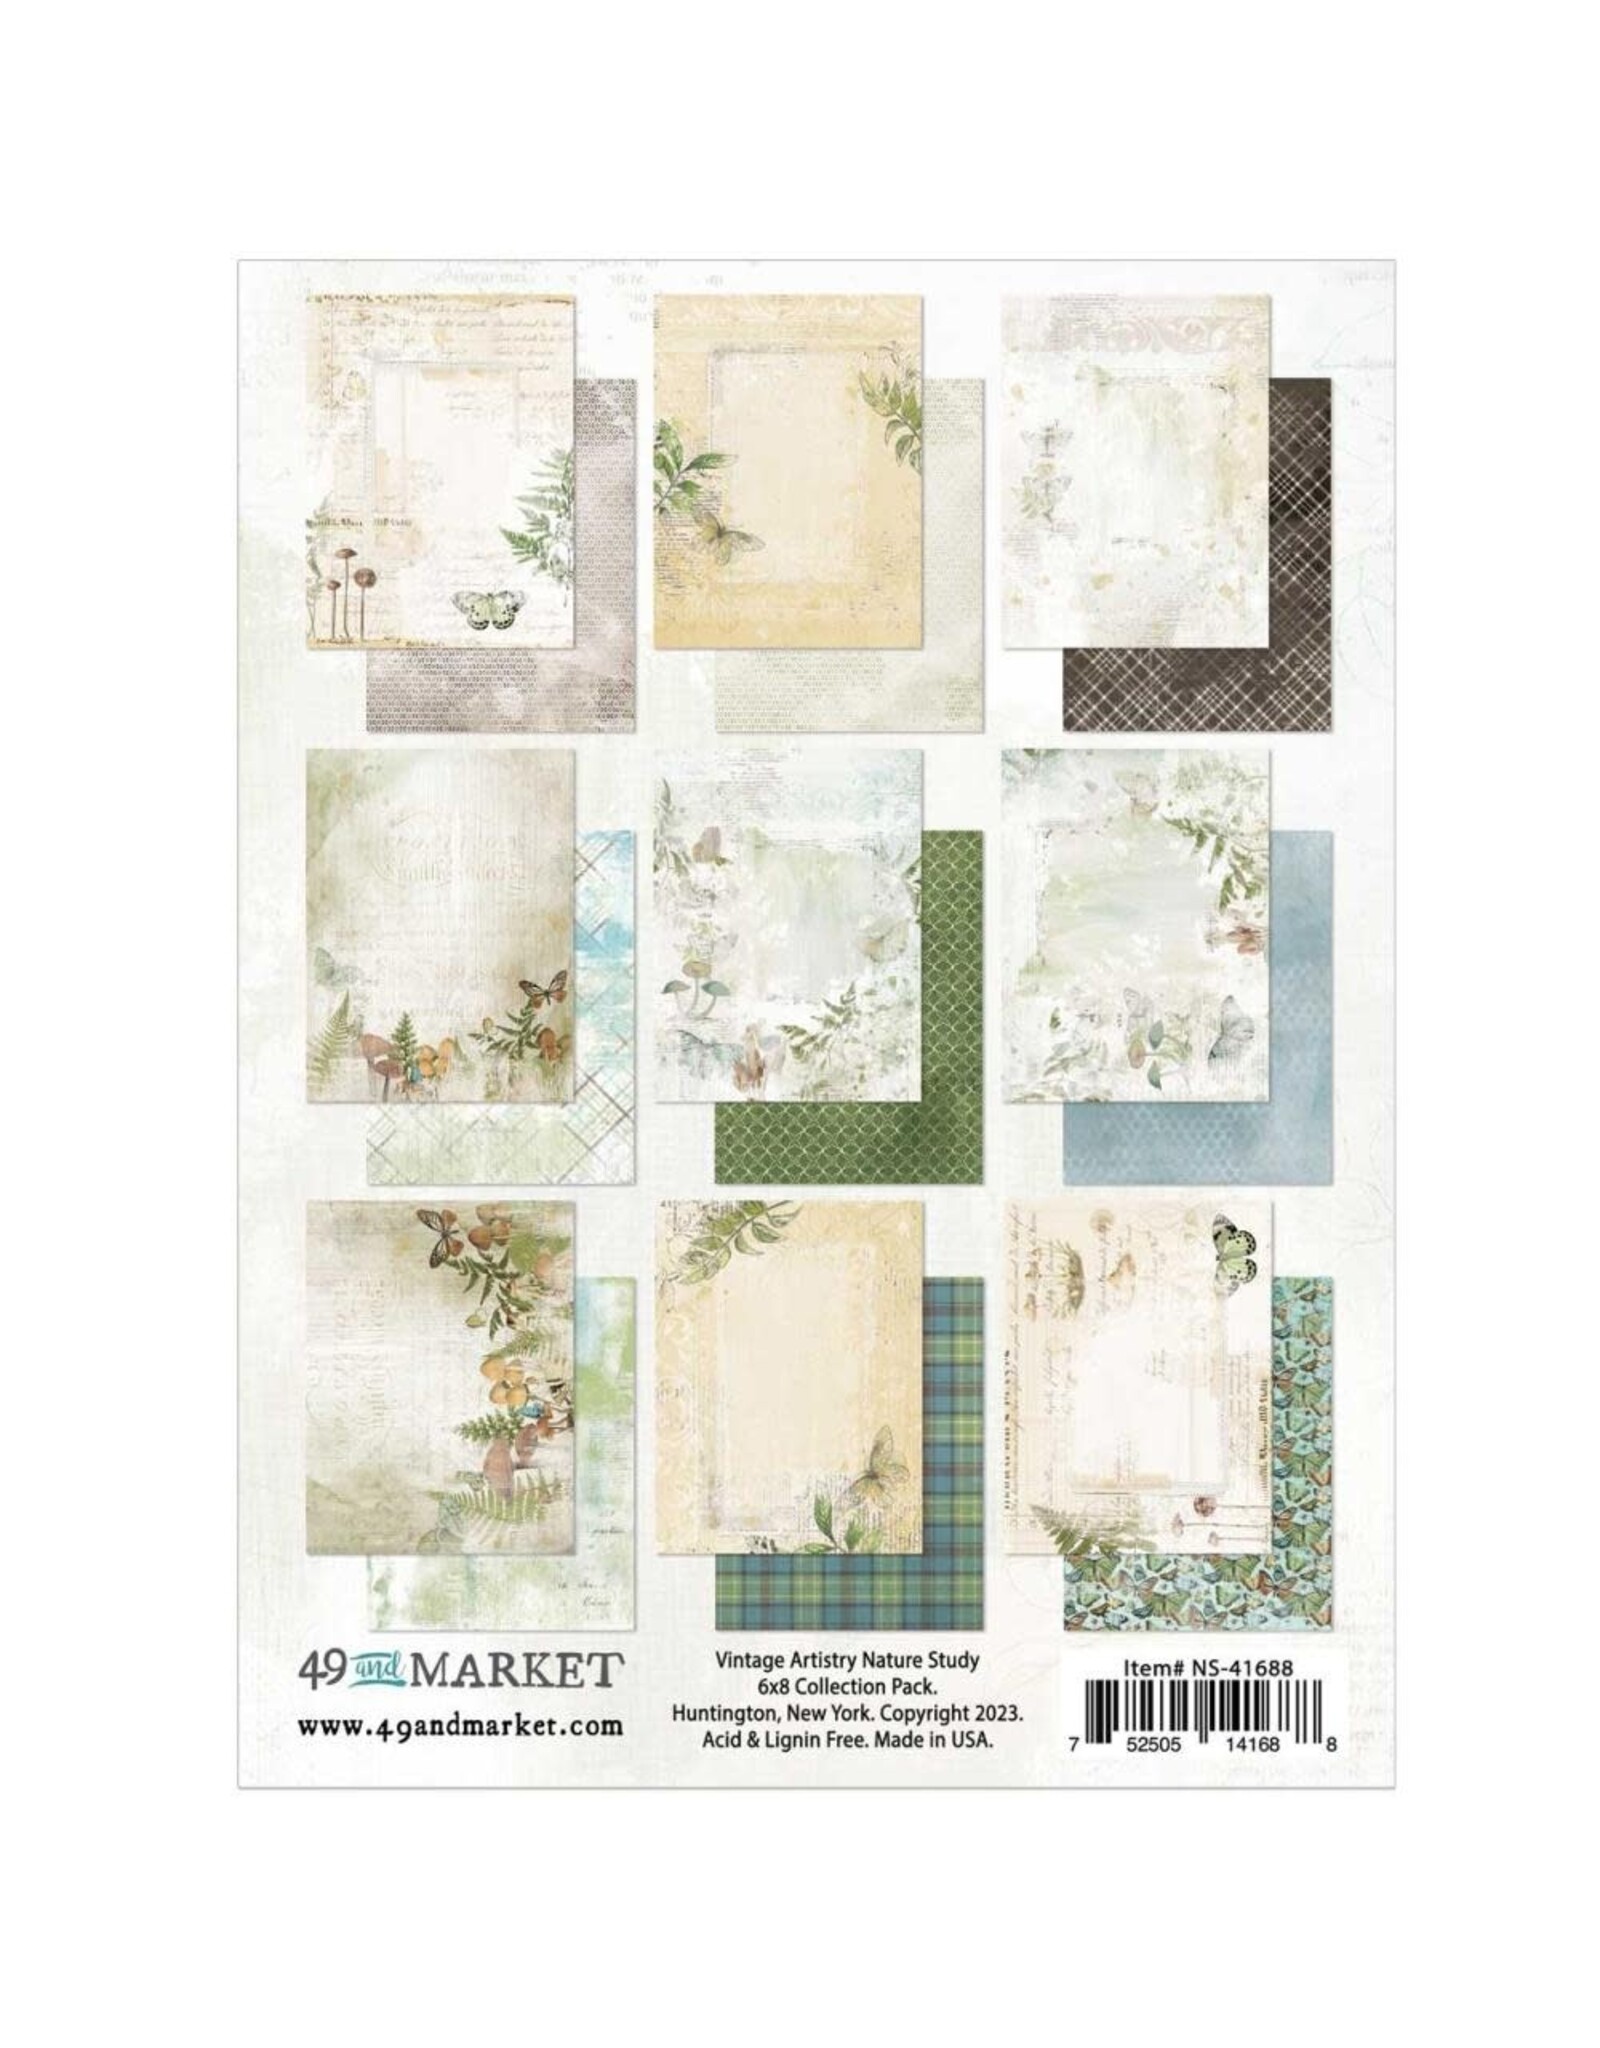 49 AND MARKET NATURE STUDY 6X8 COLLECTION PACK